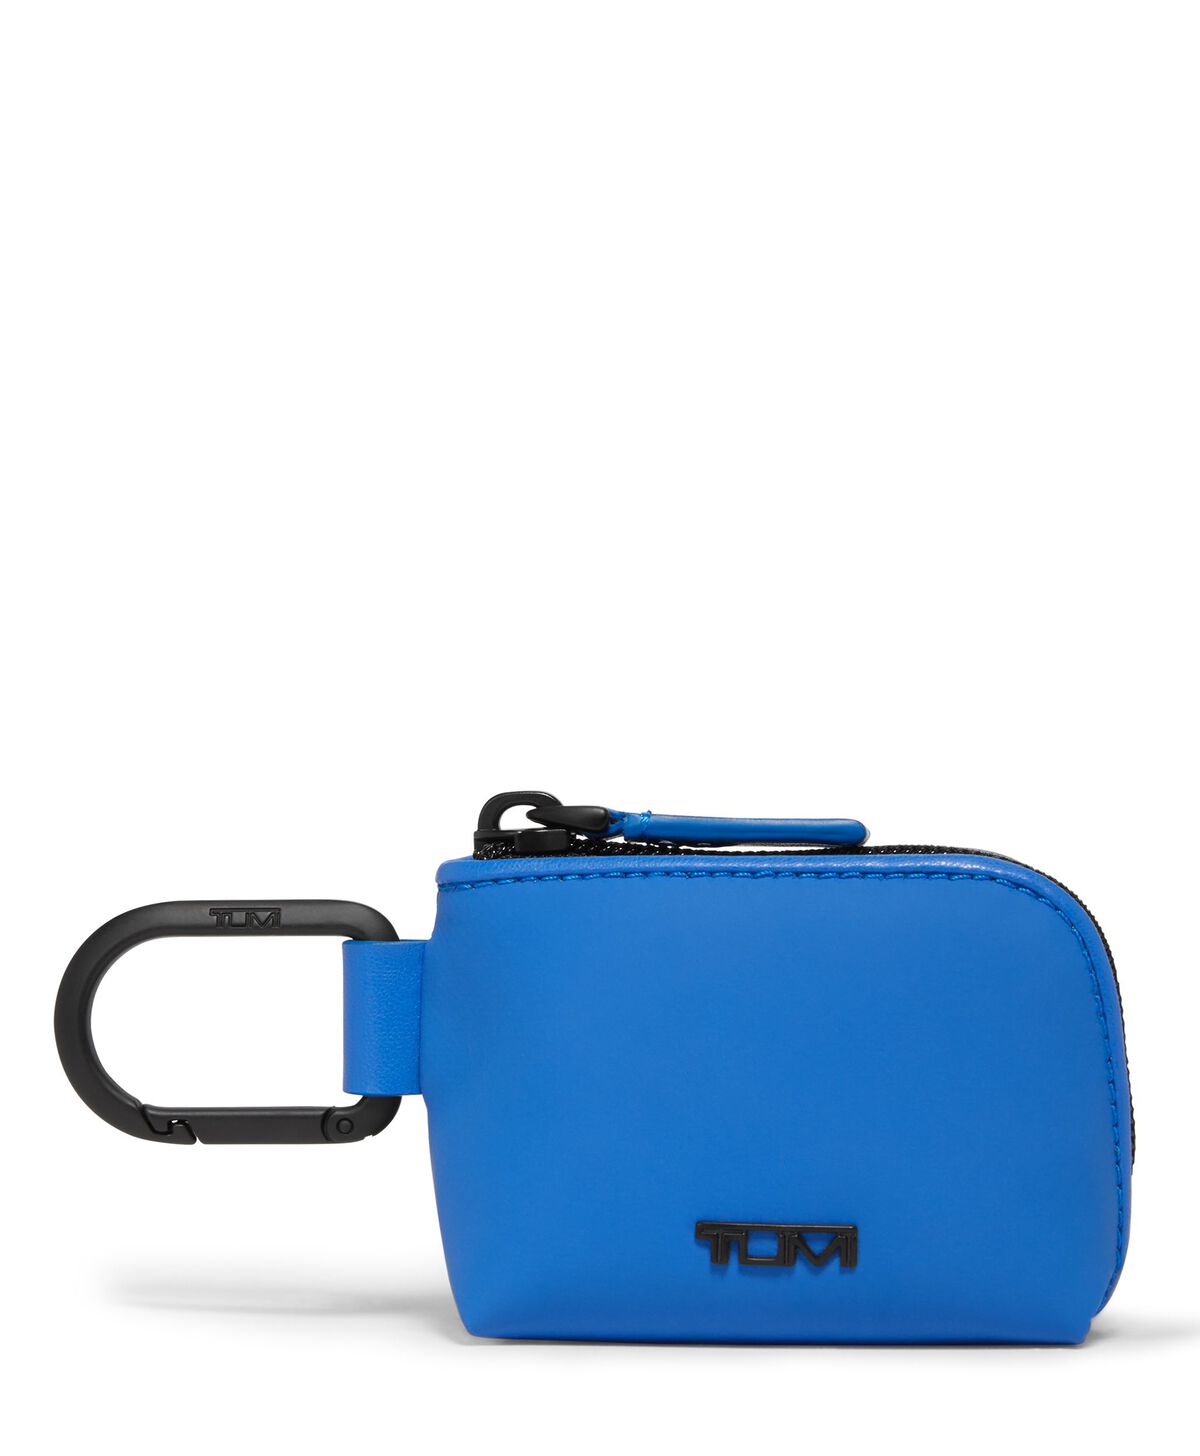 Tumi Travel Accessory EXTRA SMALL POUCH  Lapis Blue